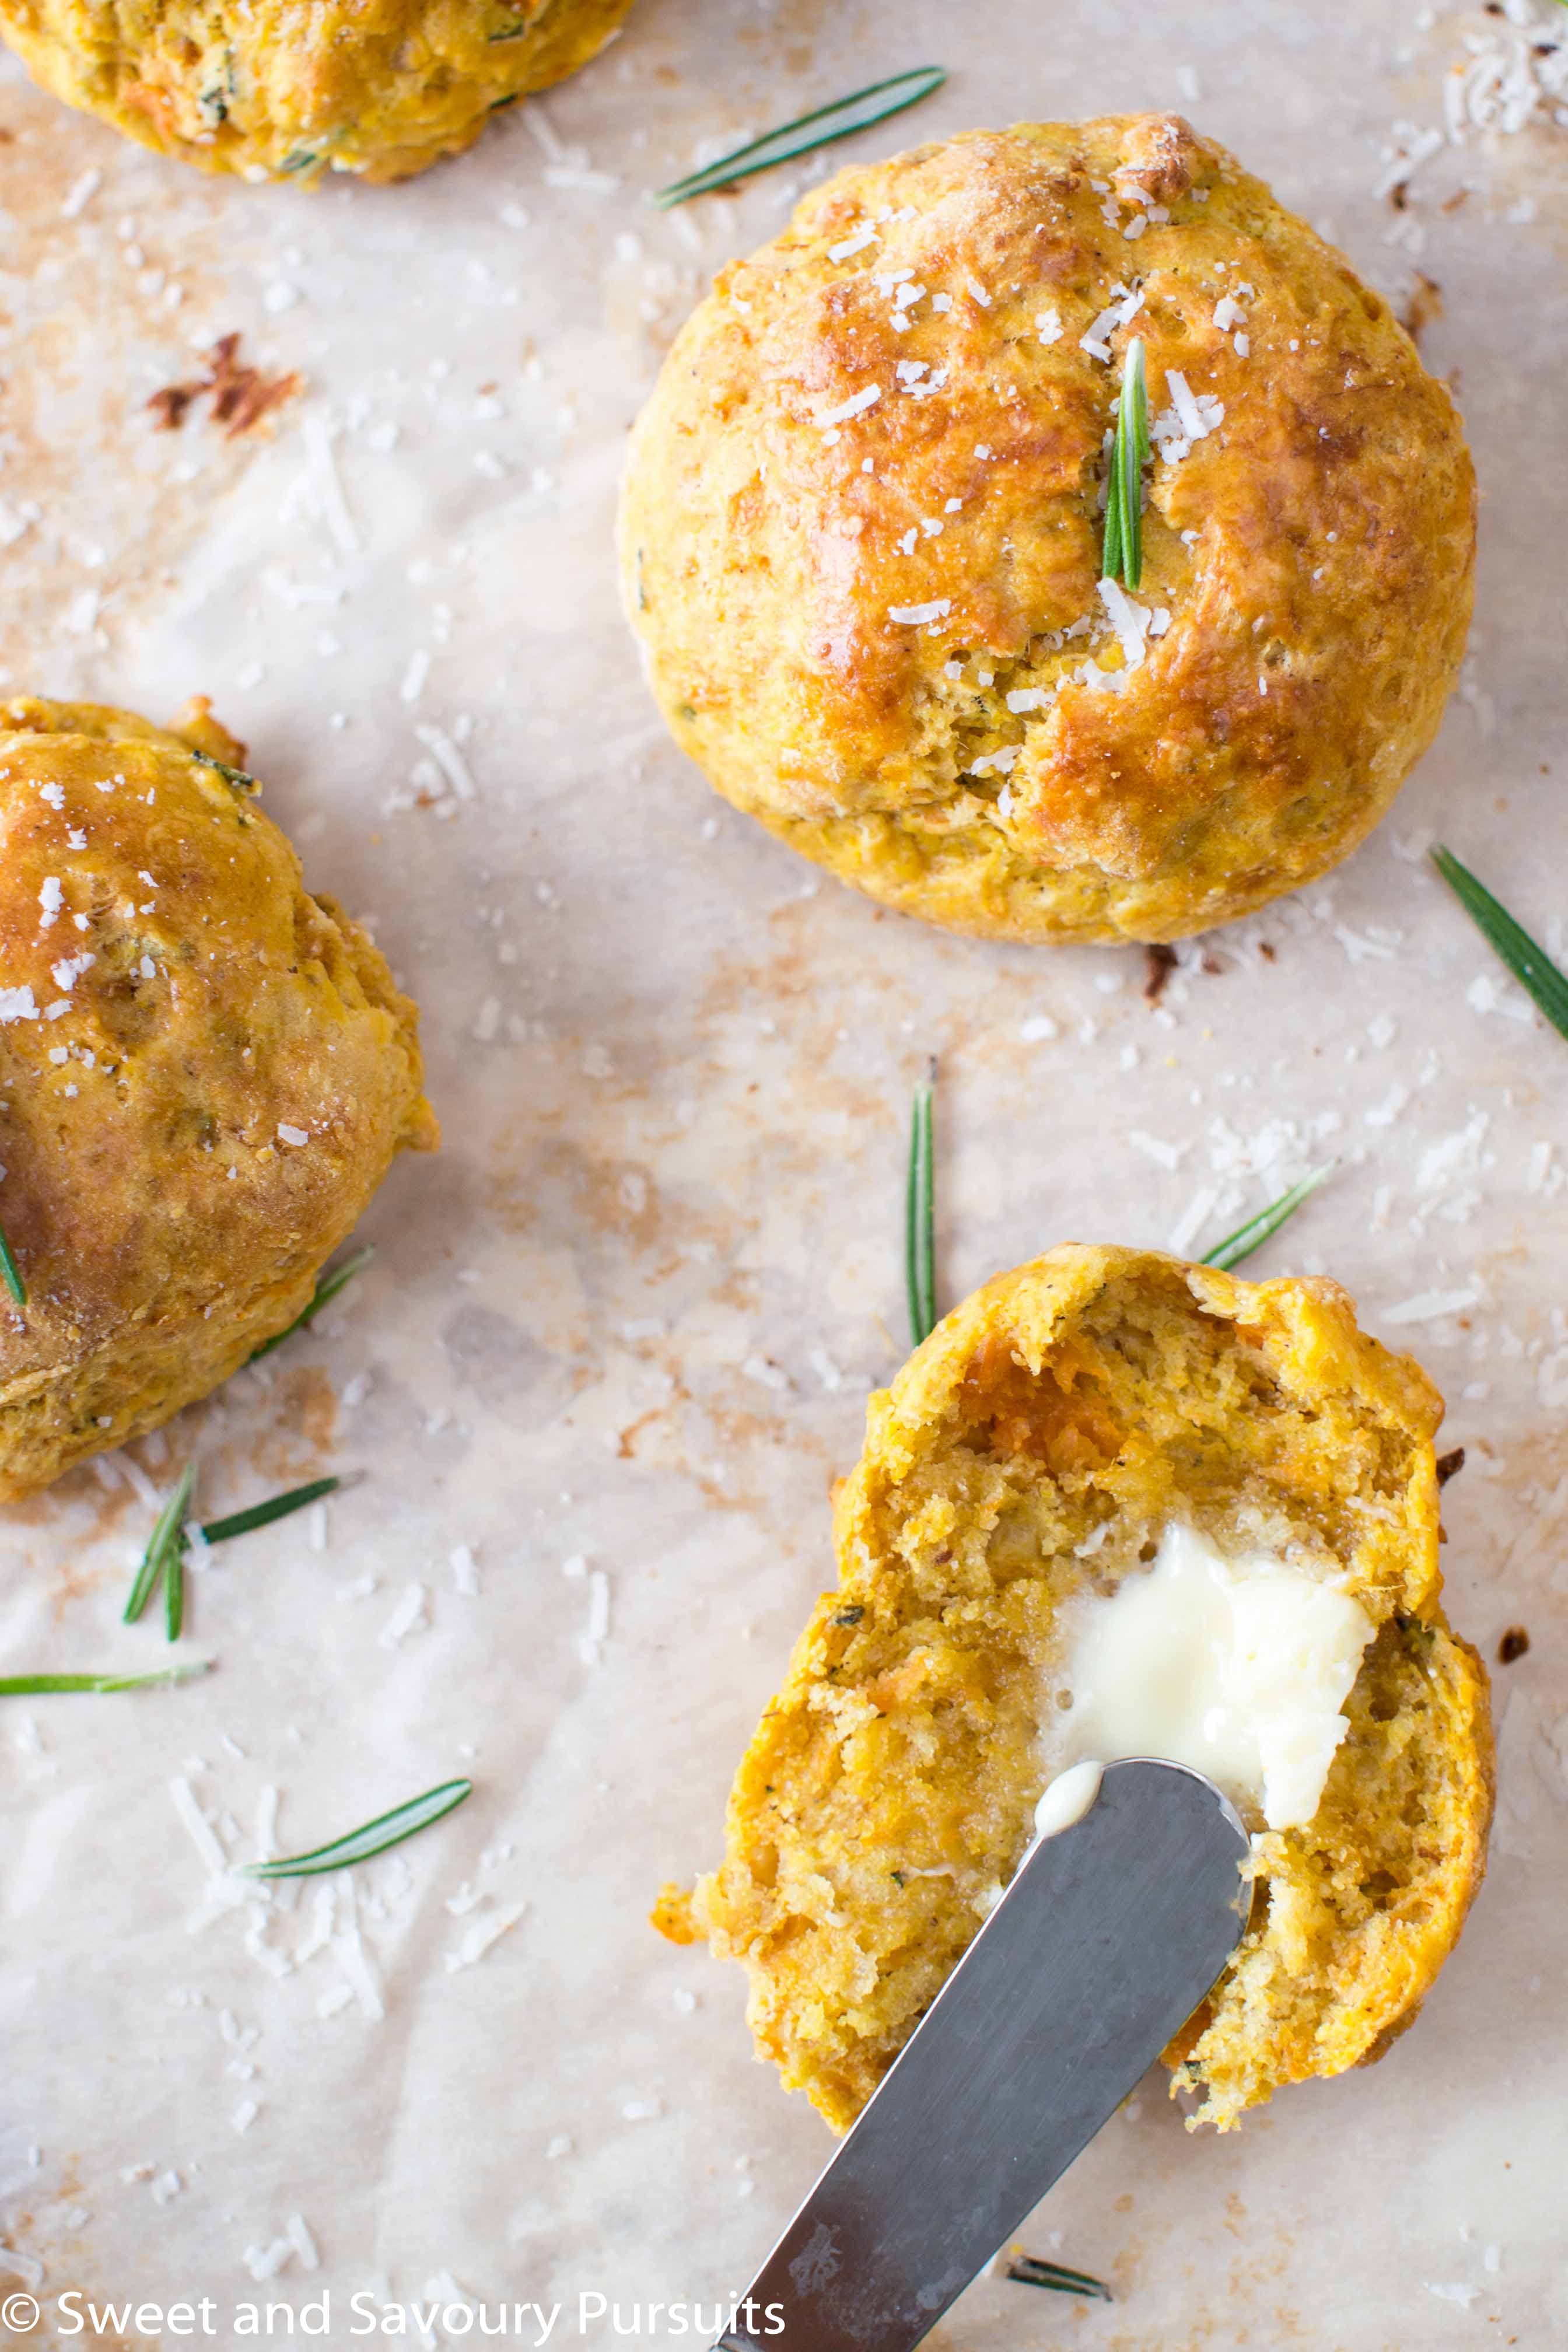 Sweet Potato, Parmesan and Rosemary Biscuit cut in half with butter.